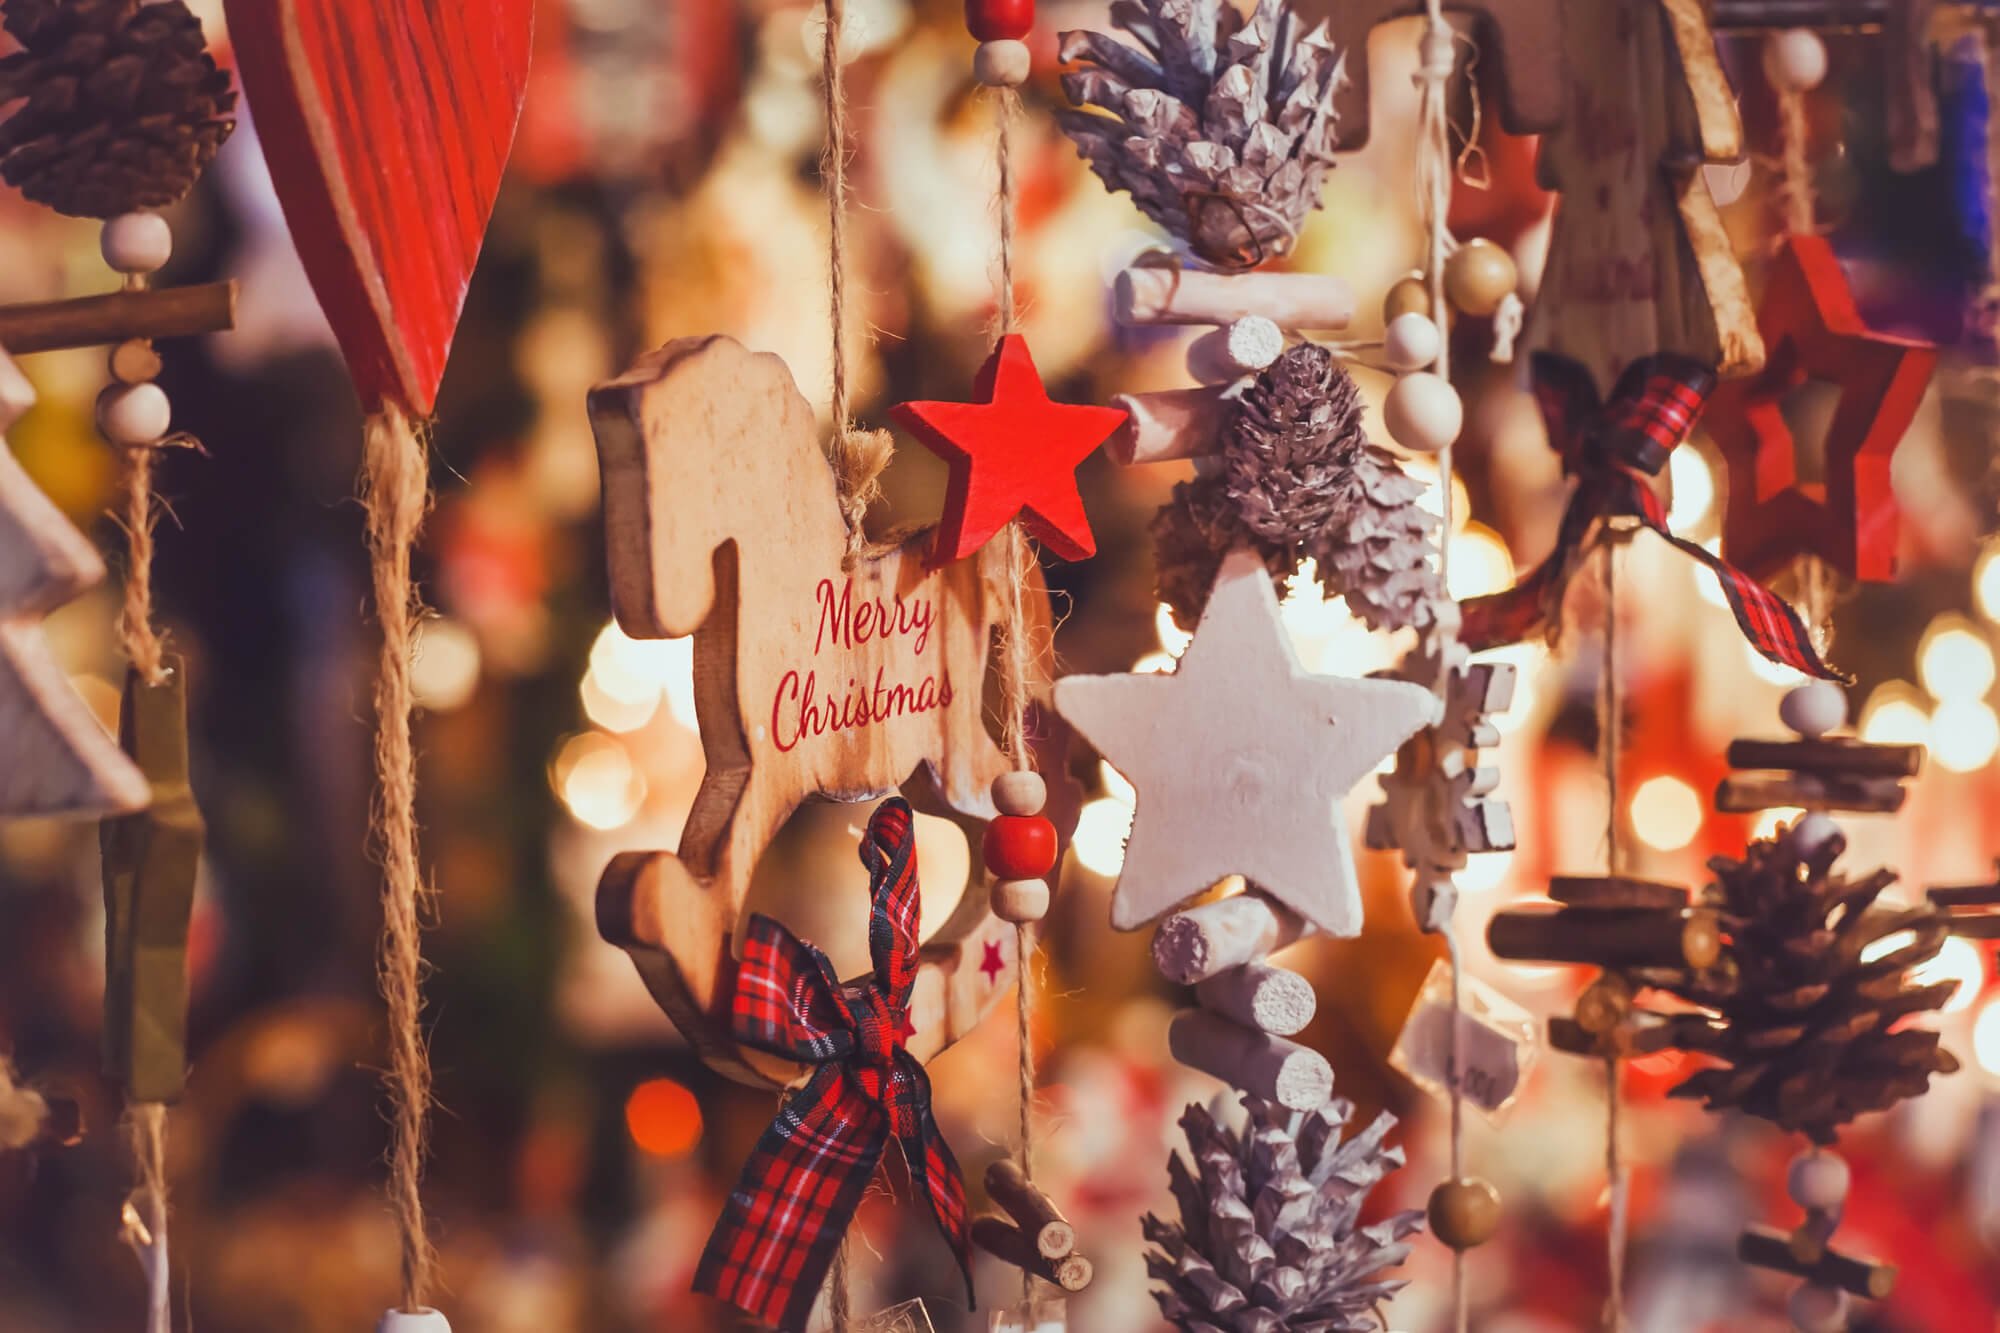 Decorations for Christmas on a market stall